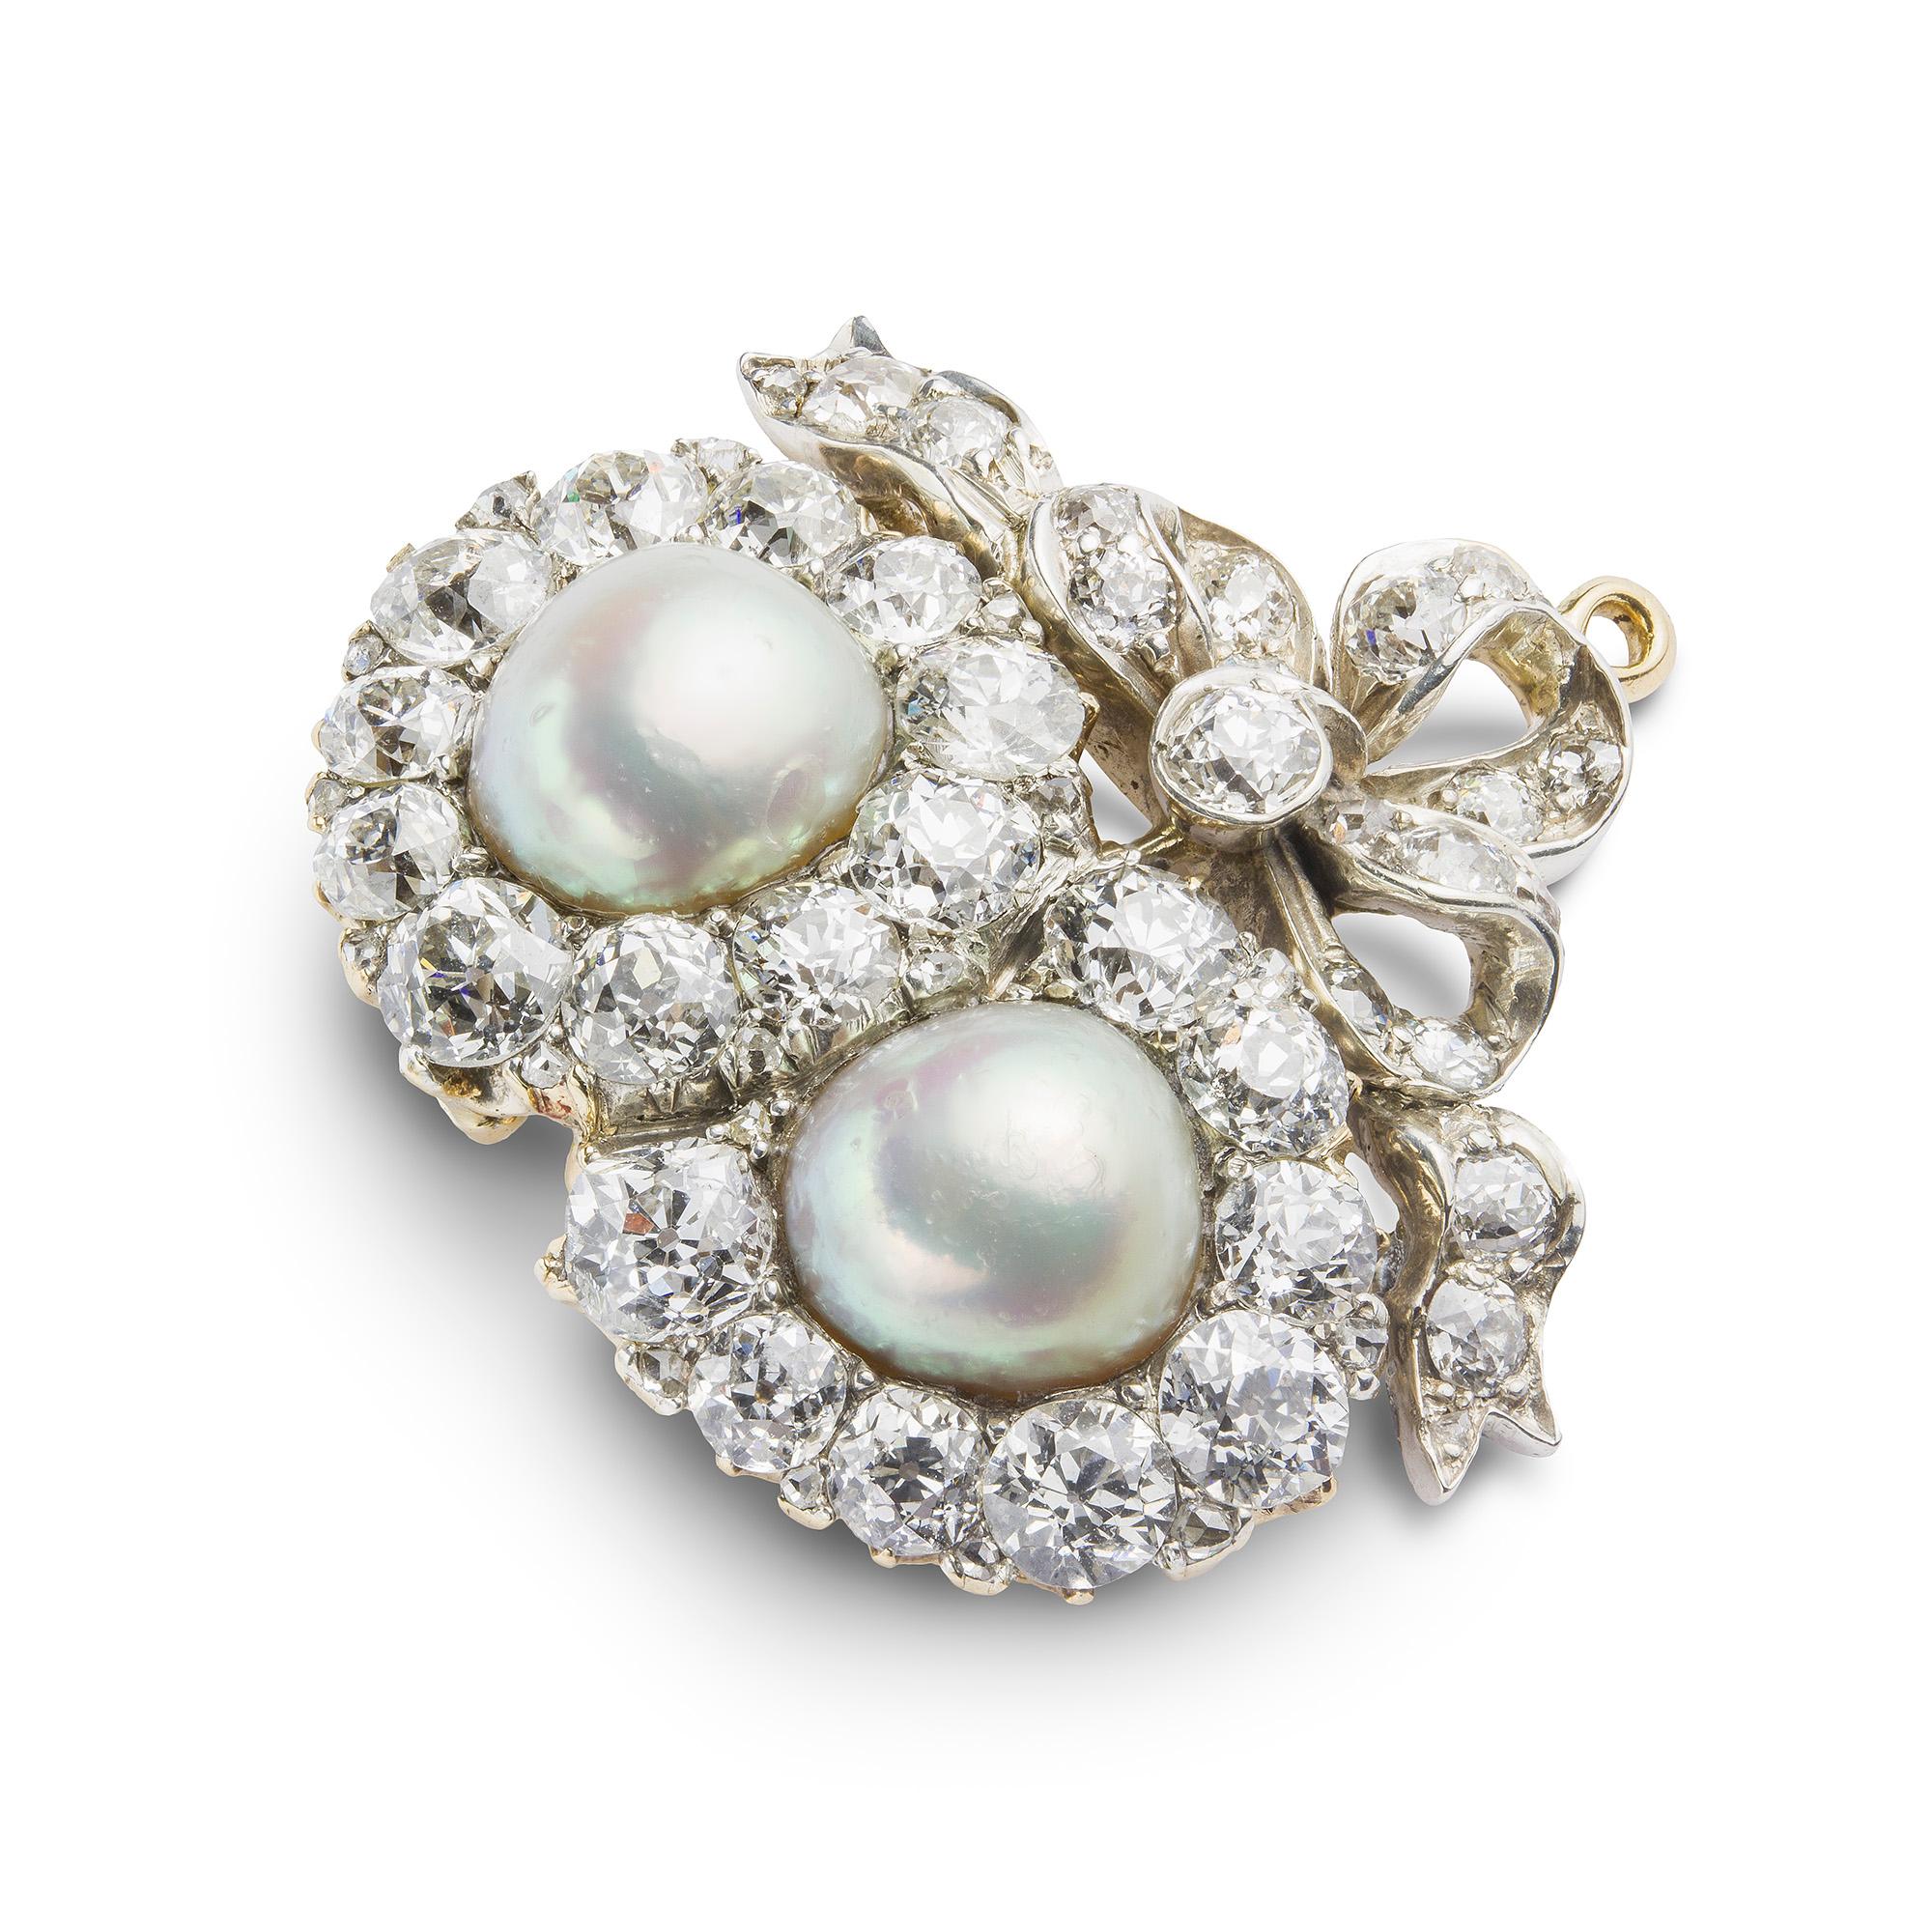 A Victorian pearl and diamond double heart brooch, each heart set with a natural saltwater oval button-shaped pearl to the centre of an old brilliant-cut diamond surround, with diamond-set ribbon bow surmount, the diamonds estimated a total of 3.8